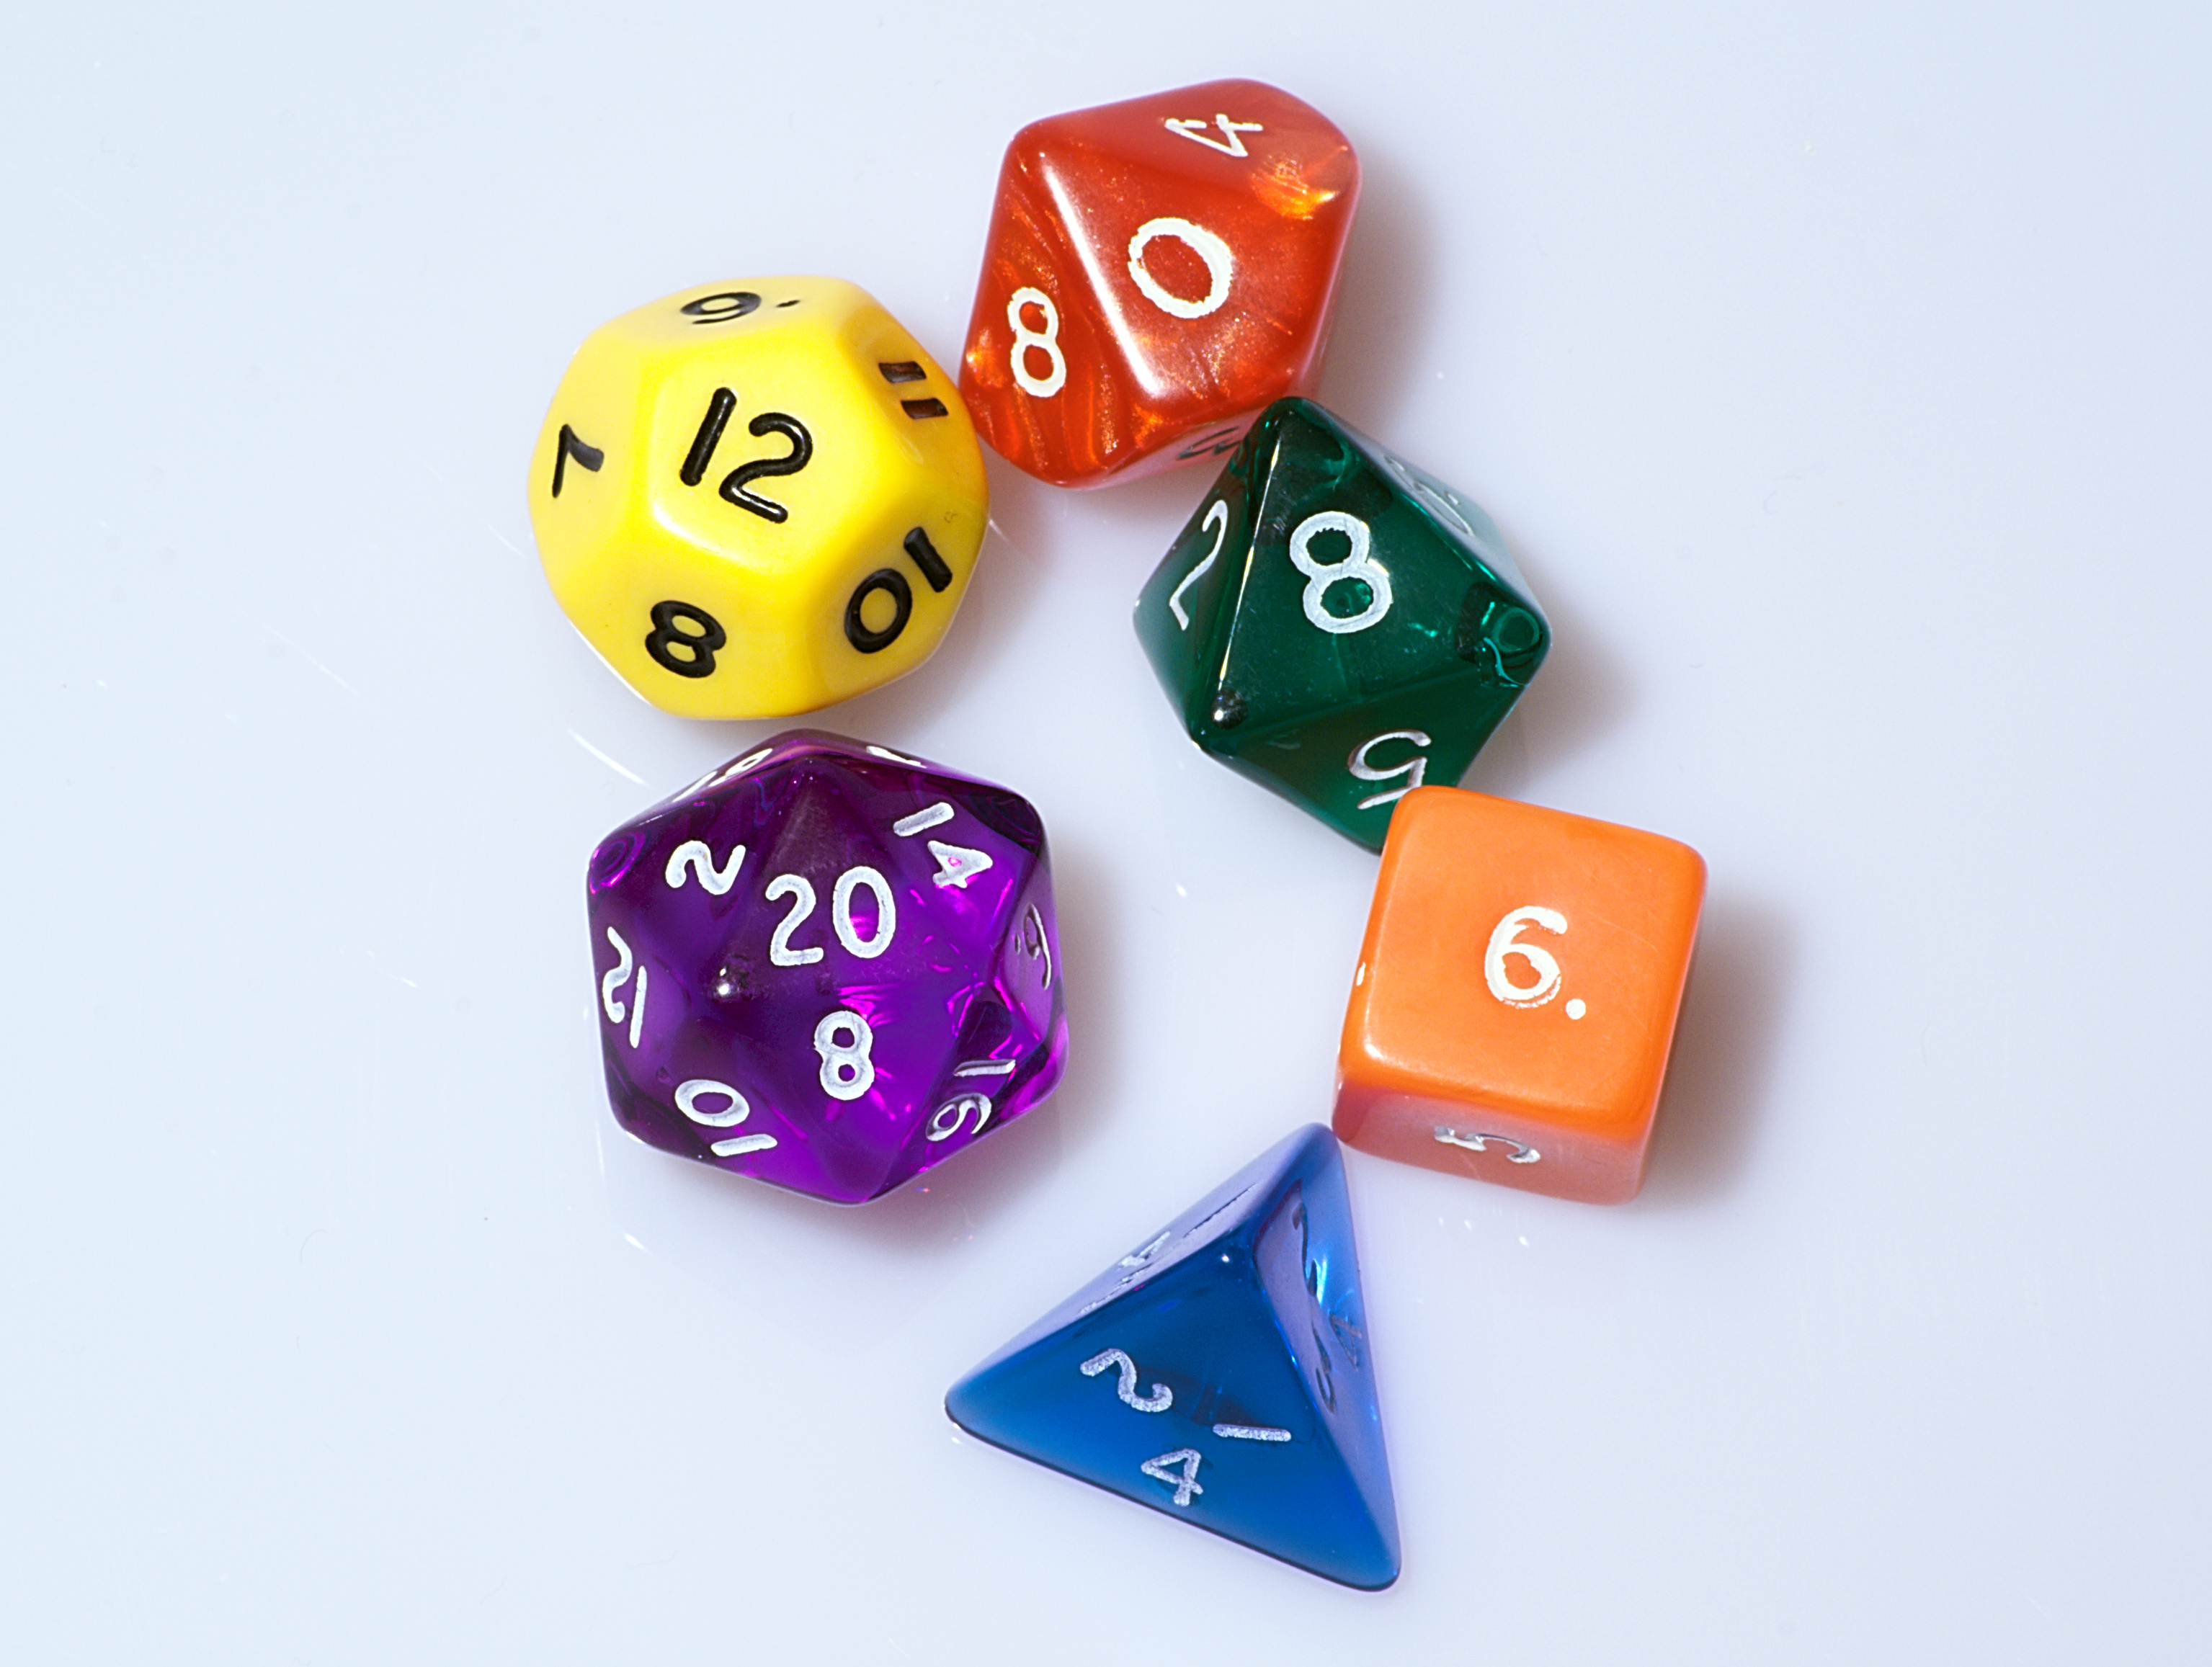 Supporting our local guys, we carry a full range of Easy Roller Dice Company dice and accessories.